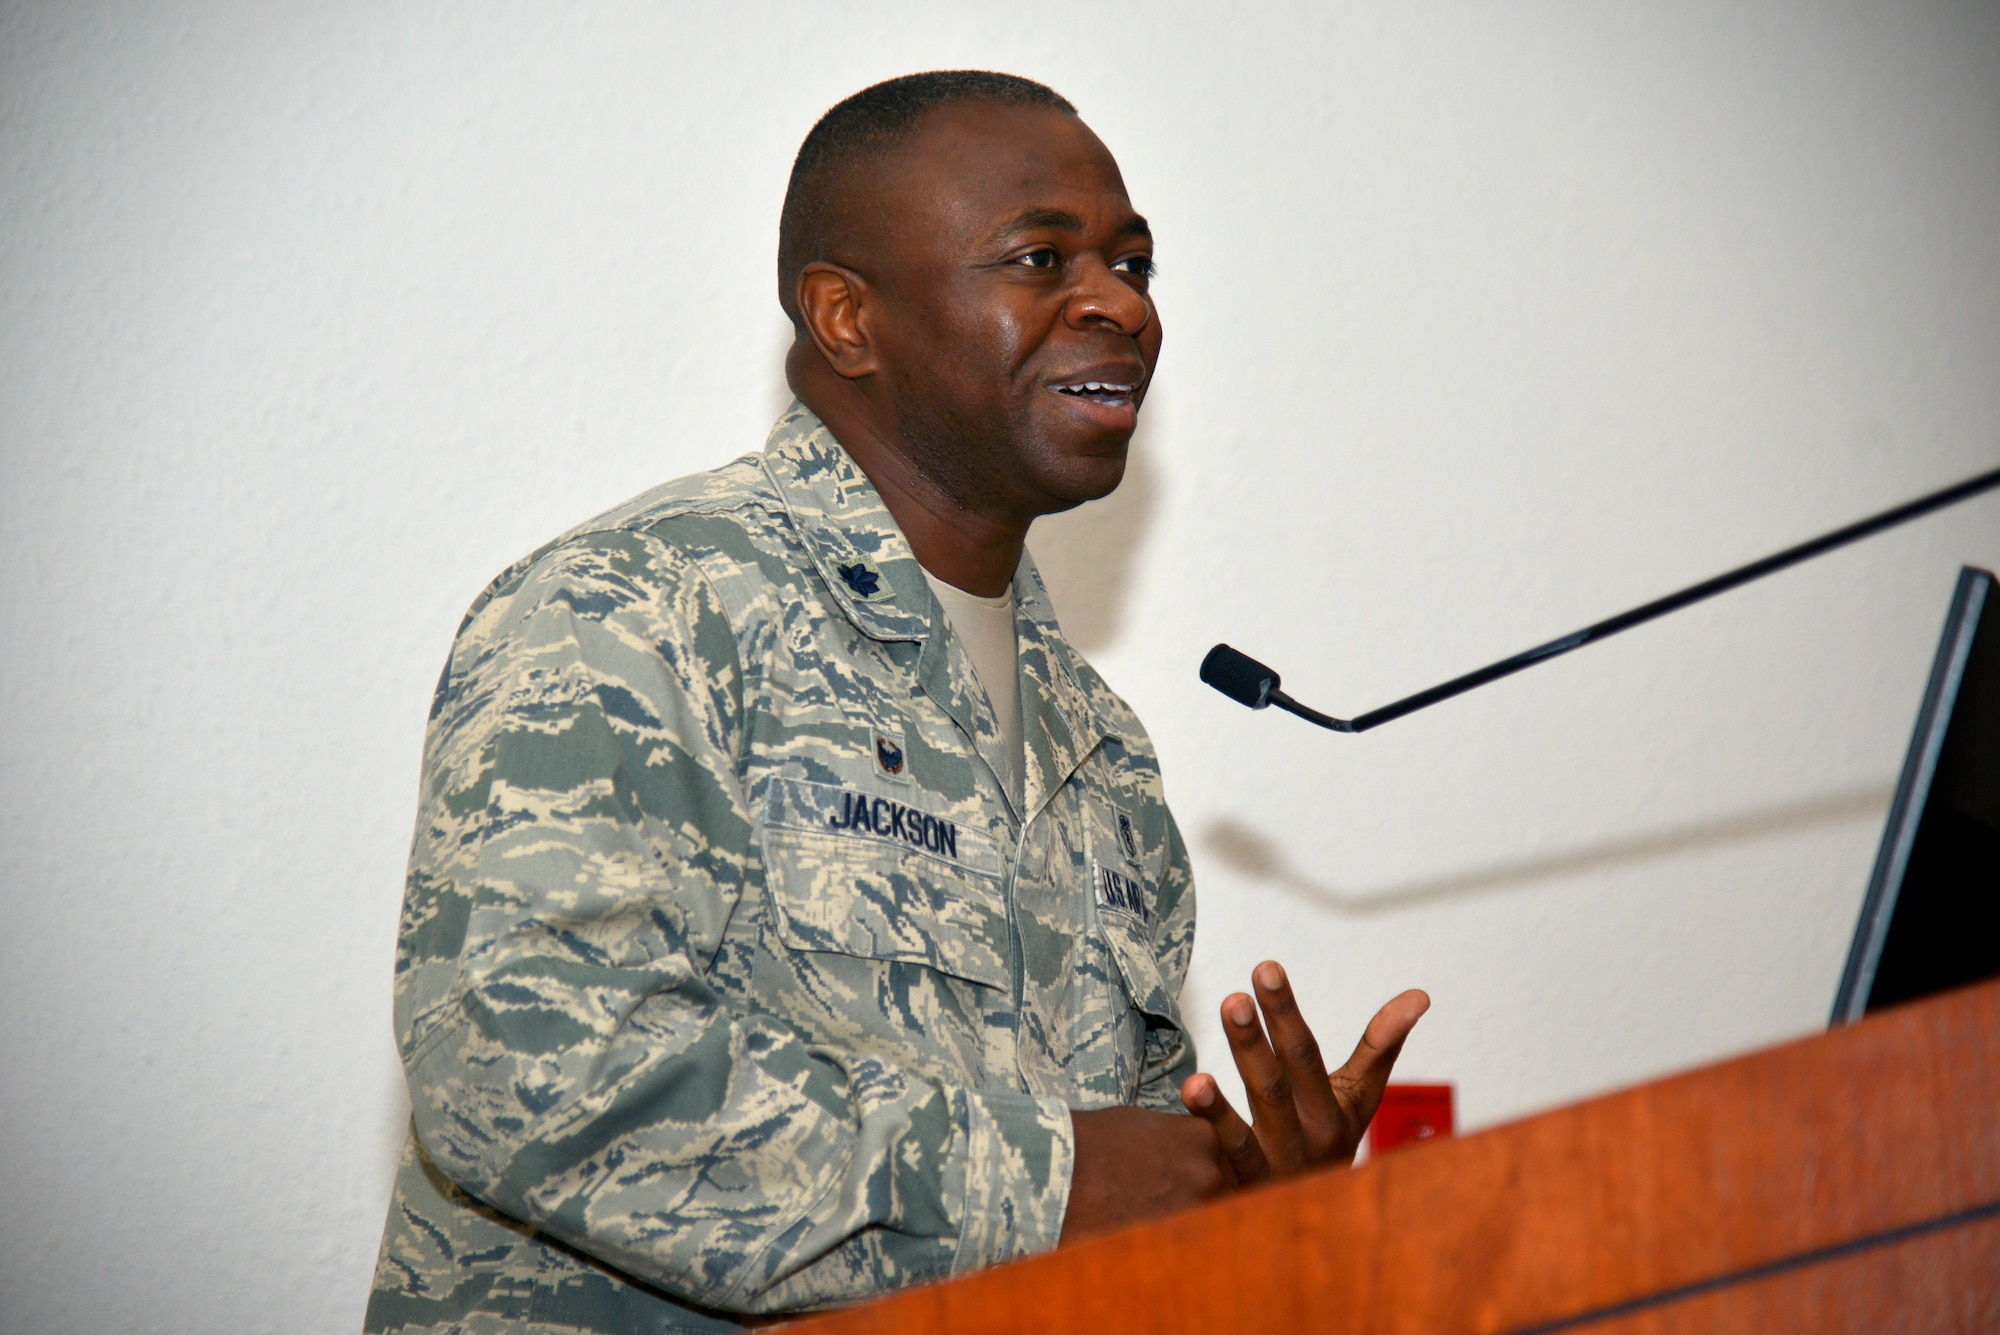 U.S. Air Force Lt. Col. Norris Jackson, 81st Surgical Operations Squadron commander, addresses his new command during the 81st MSGS change of command ceremony in the Don Wylie Auditorium at Keesler Air Force Base, Mississippi, July 9, 2019. Jackson assumed command from Col. Ryan Mihata, outgoing 81st MSGS commander. (U.S. Air Force photo by Airman Seth Haddix)